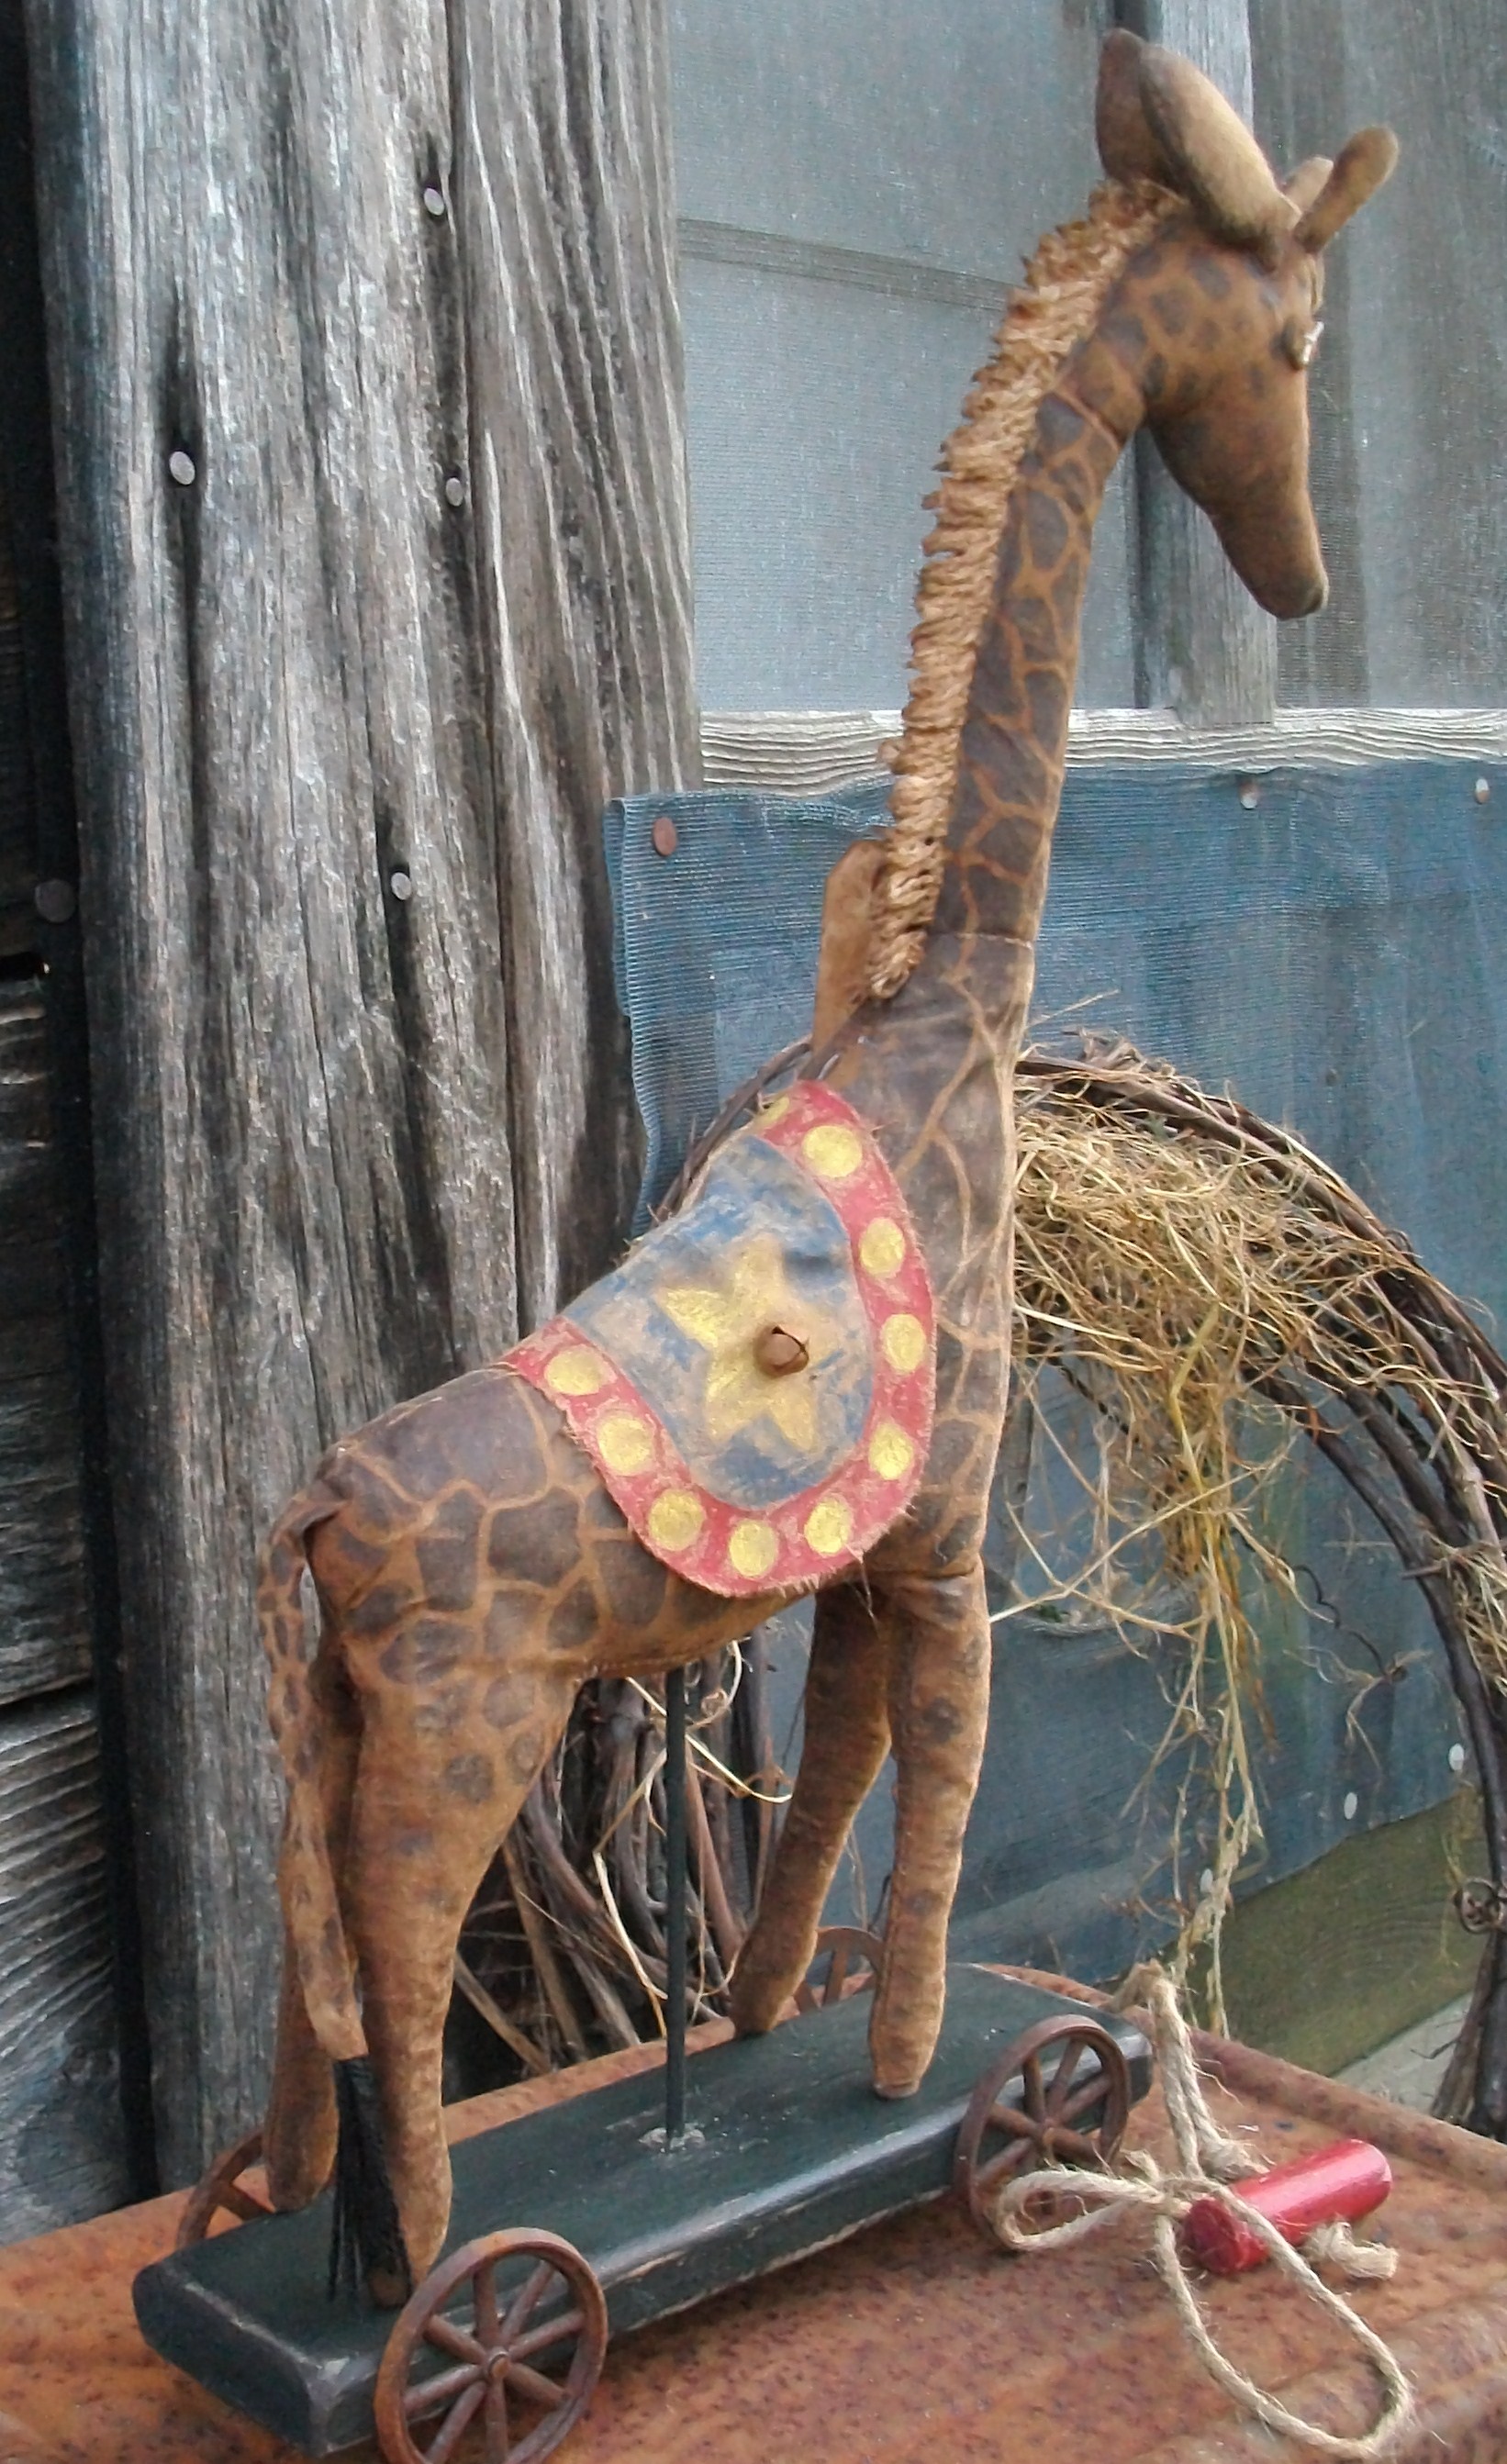 Primitive Vintage Look Pull Toy - Whimsical Circus Giraffe on Luulla